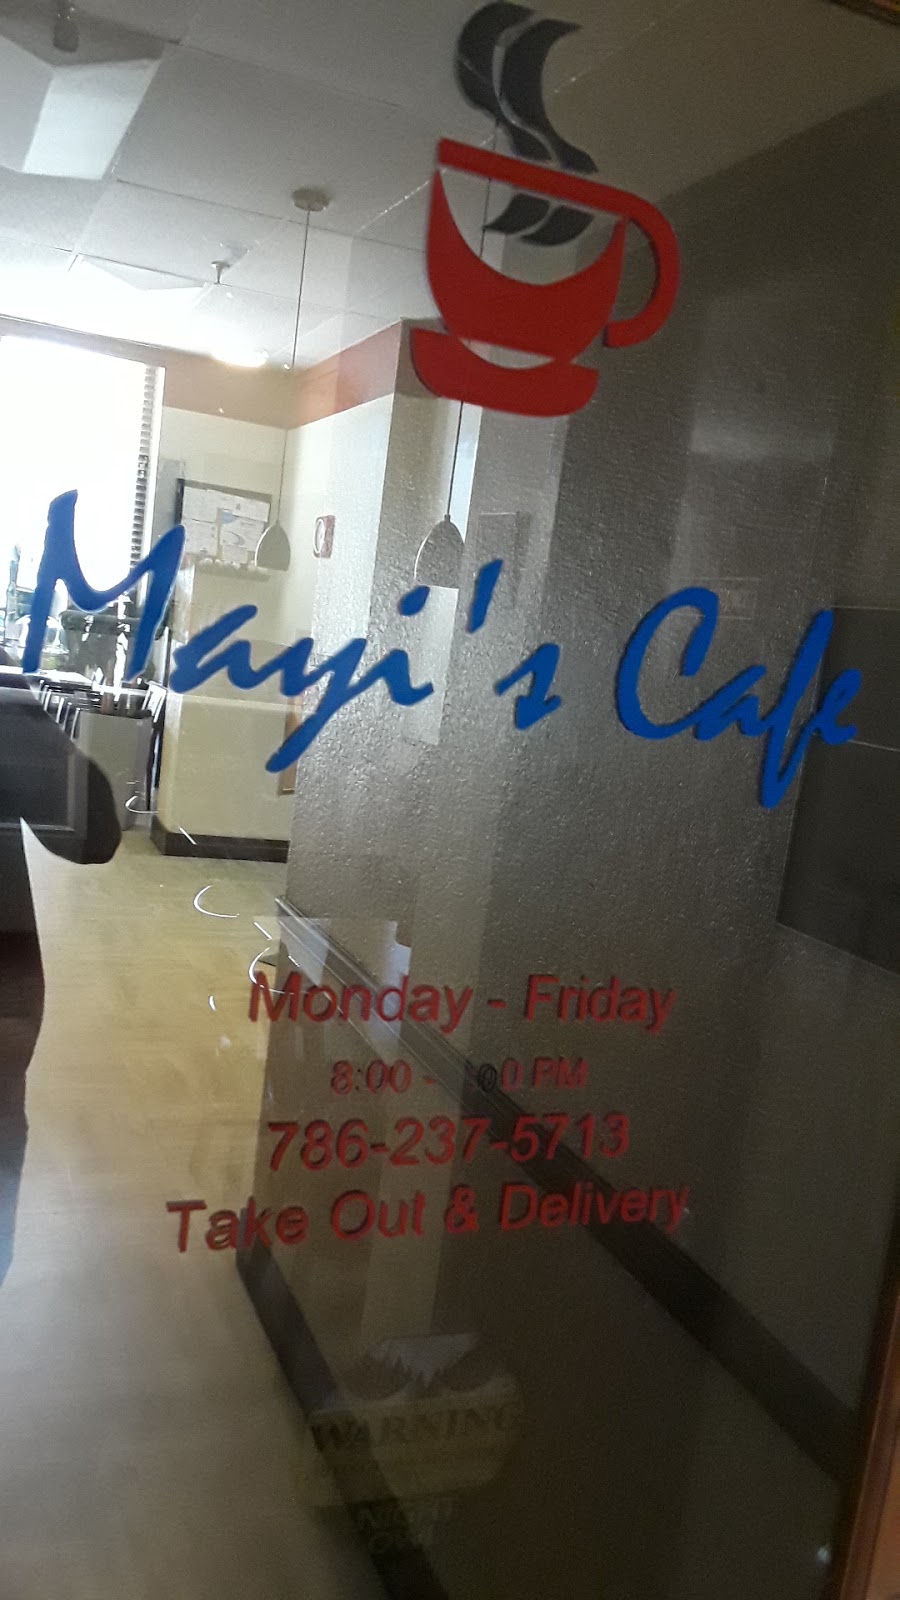 Mayis Cafe - cafe  | Photo 2 of 2 | Address: 11880 SW 40th St Suite 111, Miami, FL 33175, USA | Phone: (786) 237-5713